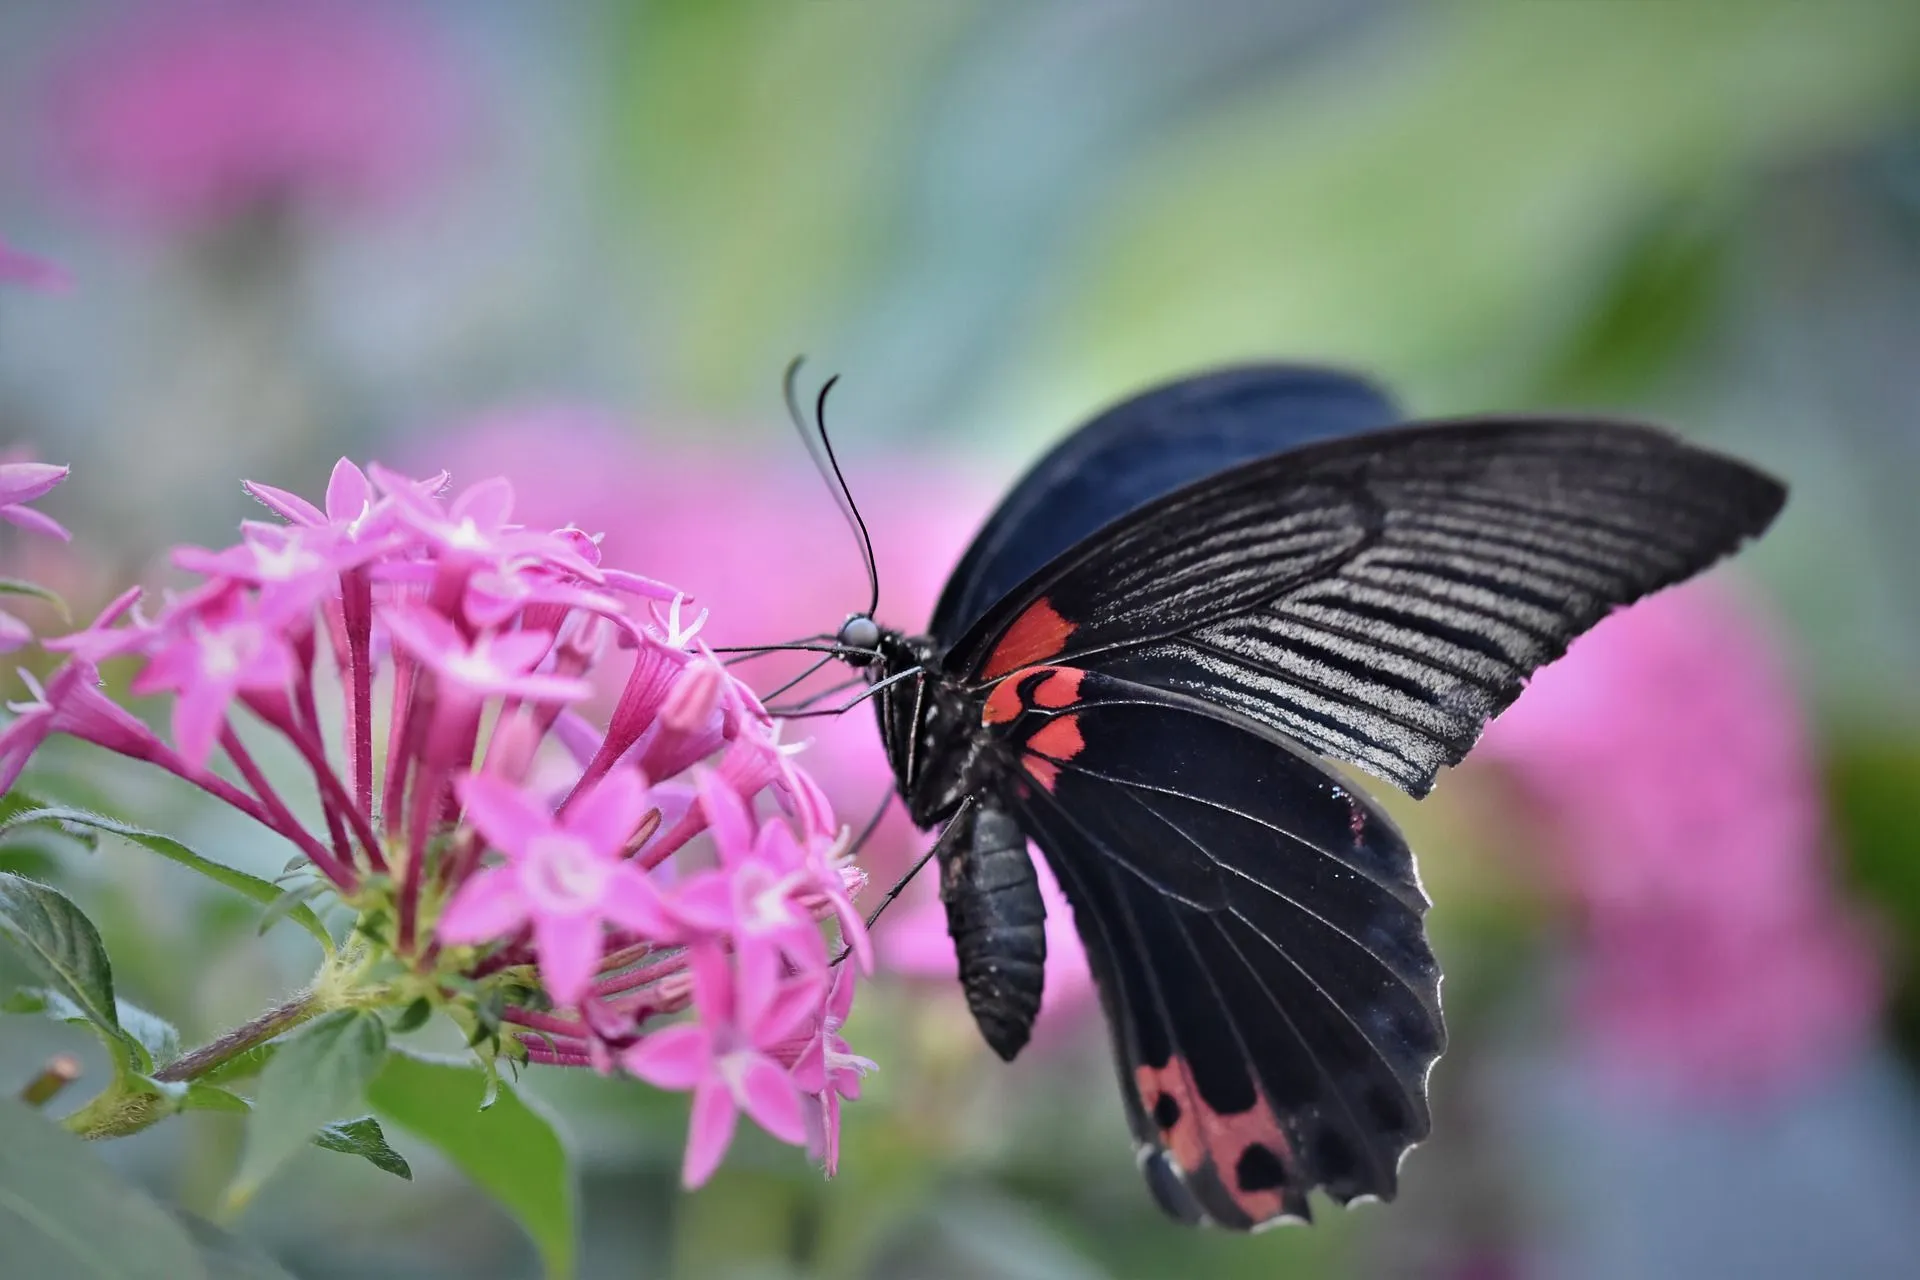 As insects, butterflies are the most colorful creatures in the world.